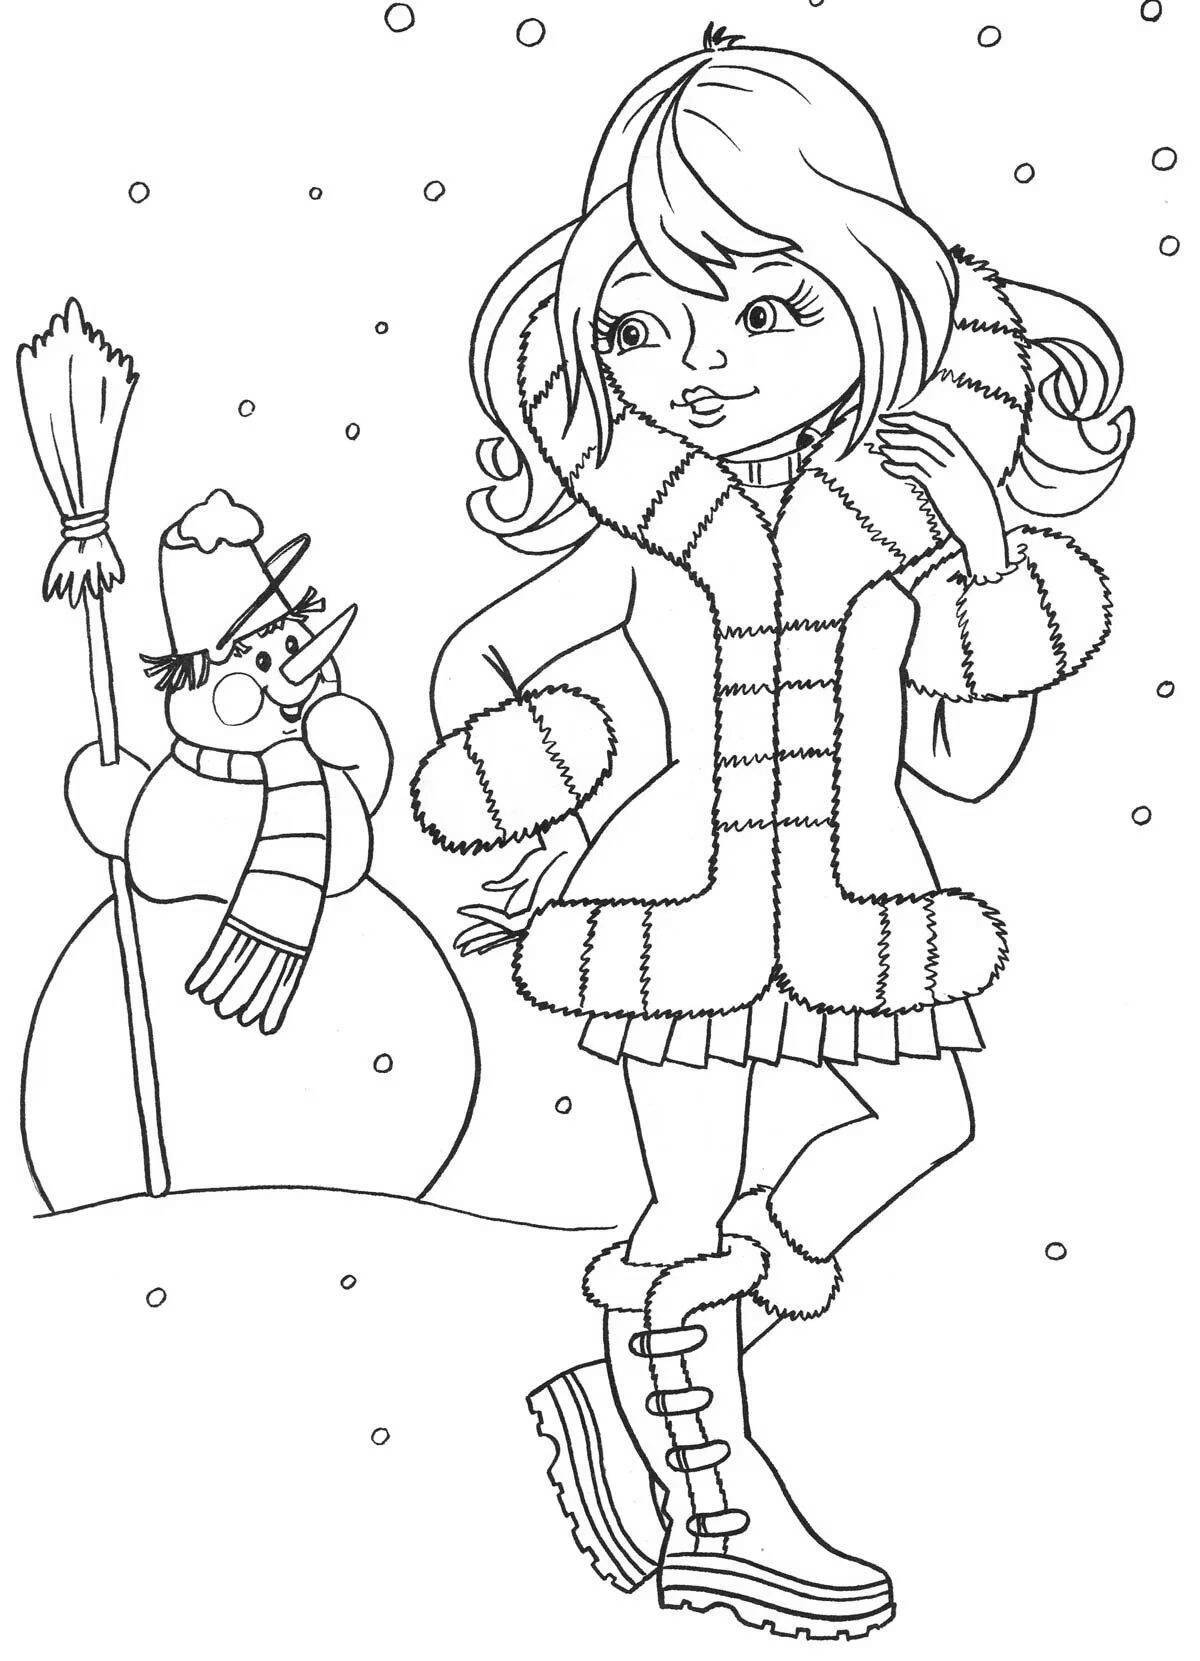 Whimsical winter coloring book for 8 year olds